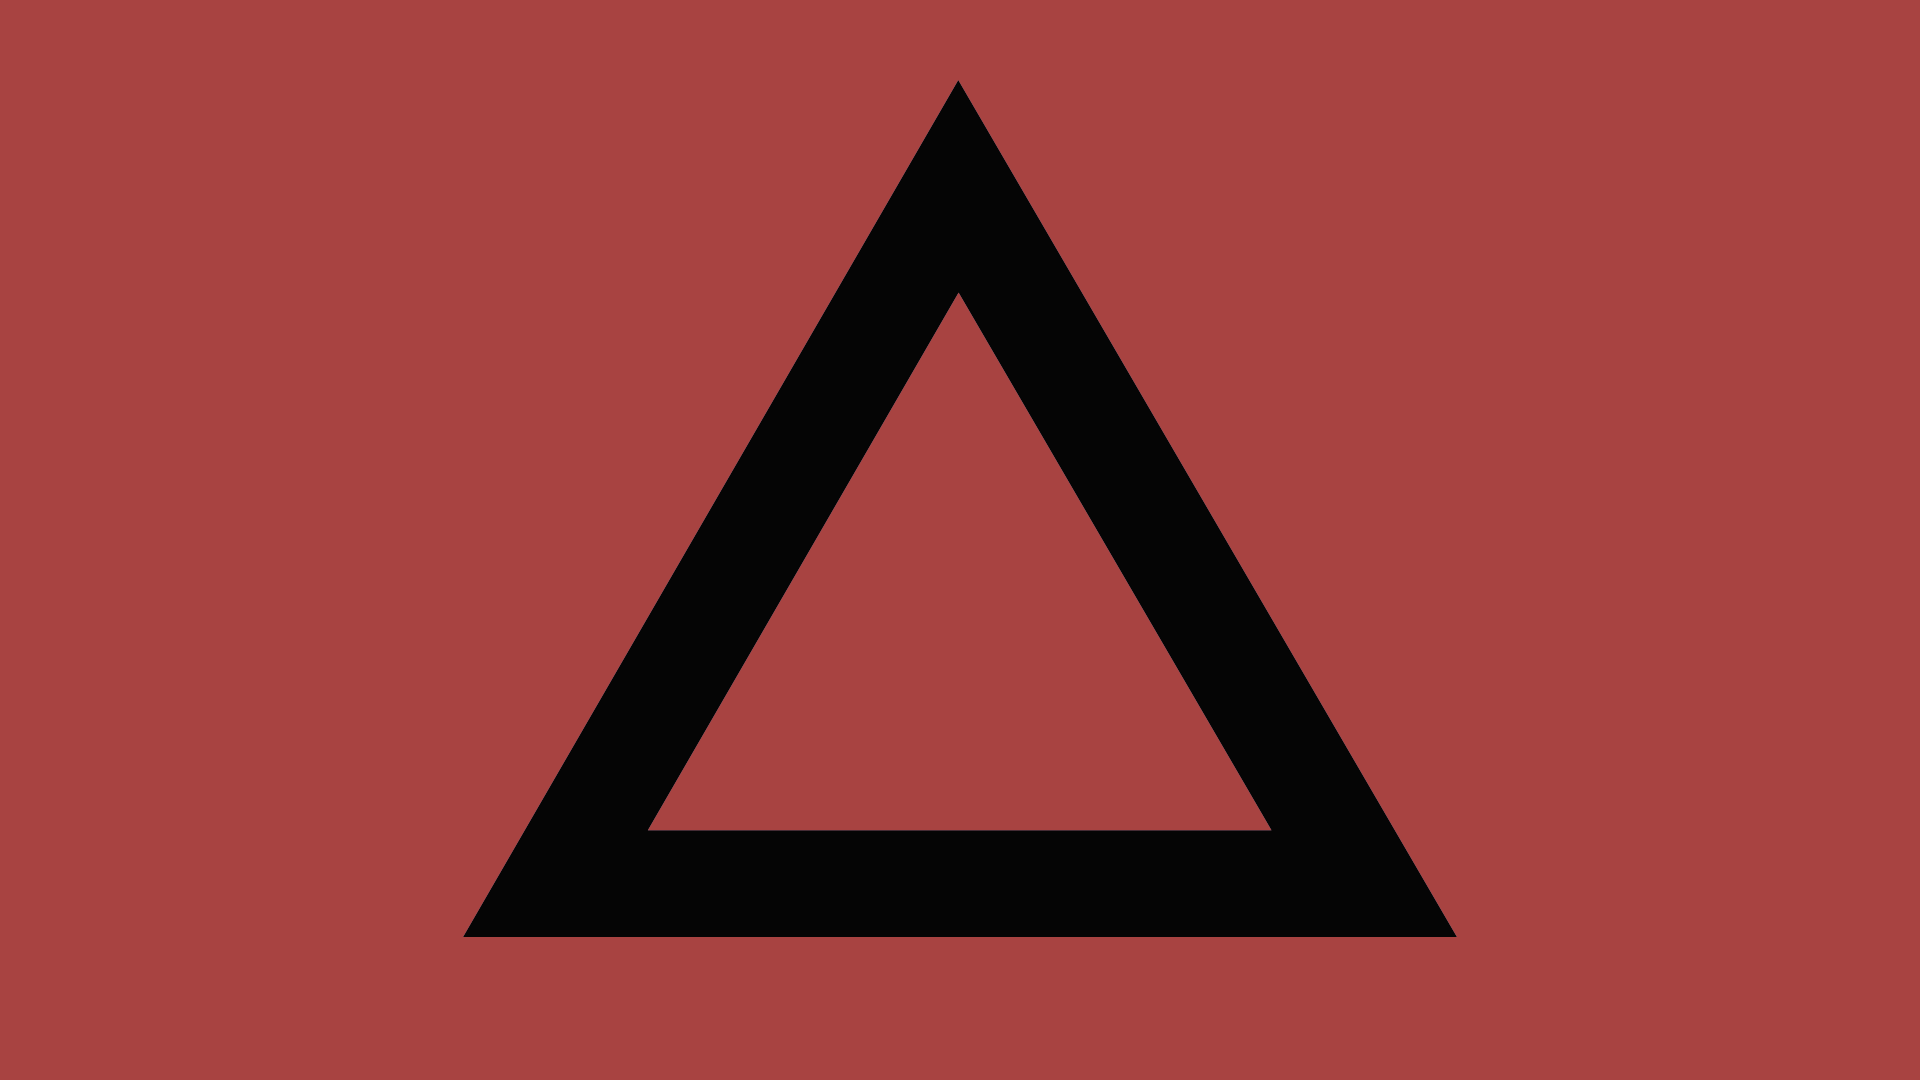 Icon for Red